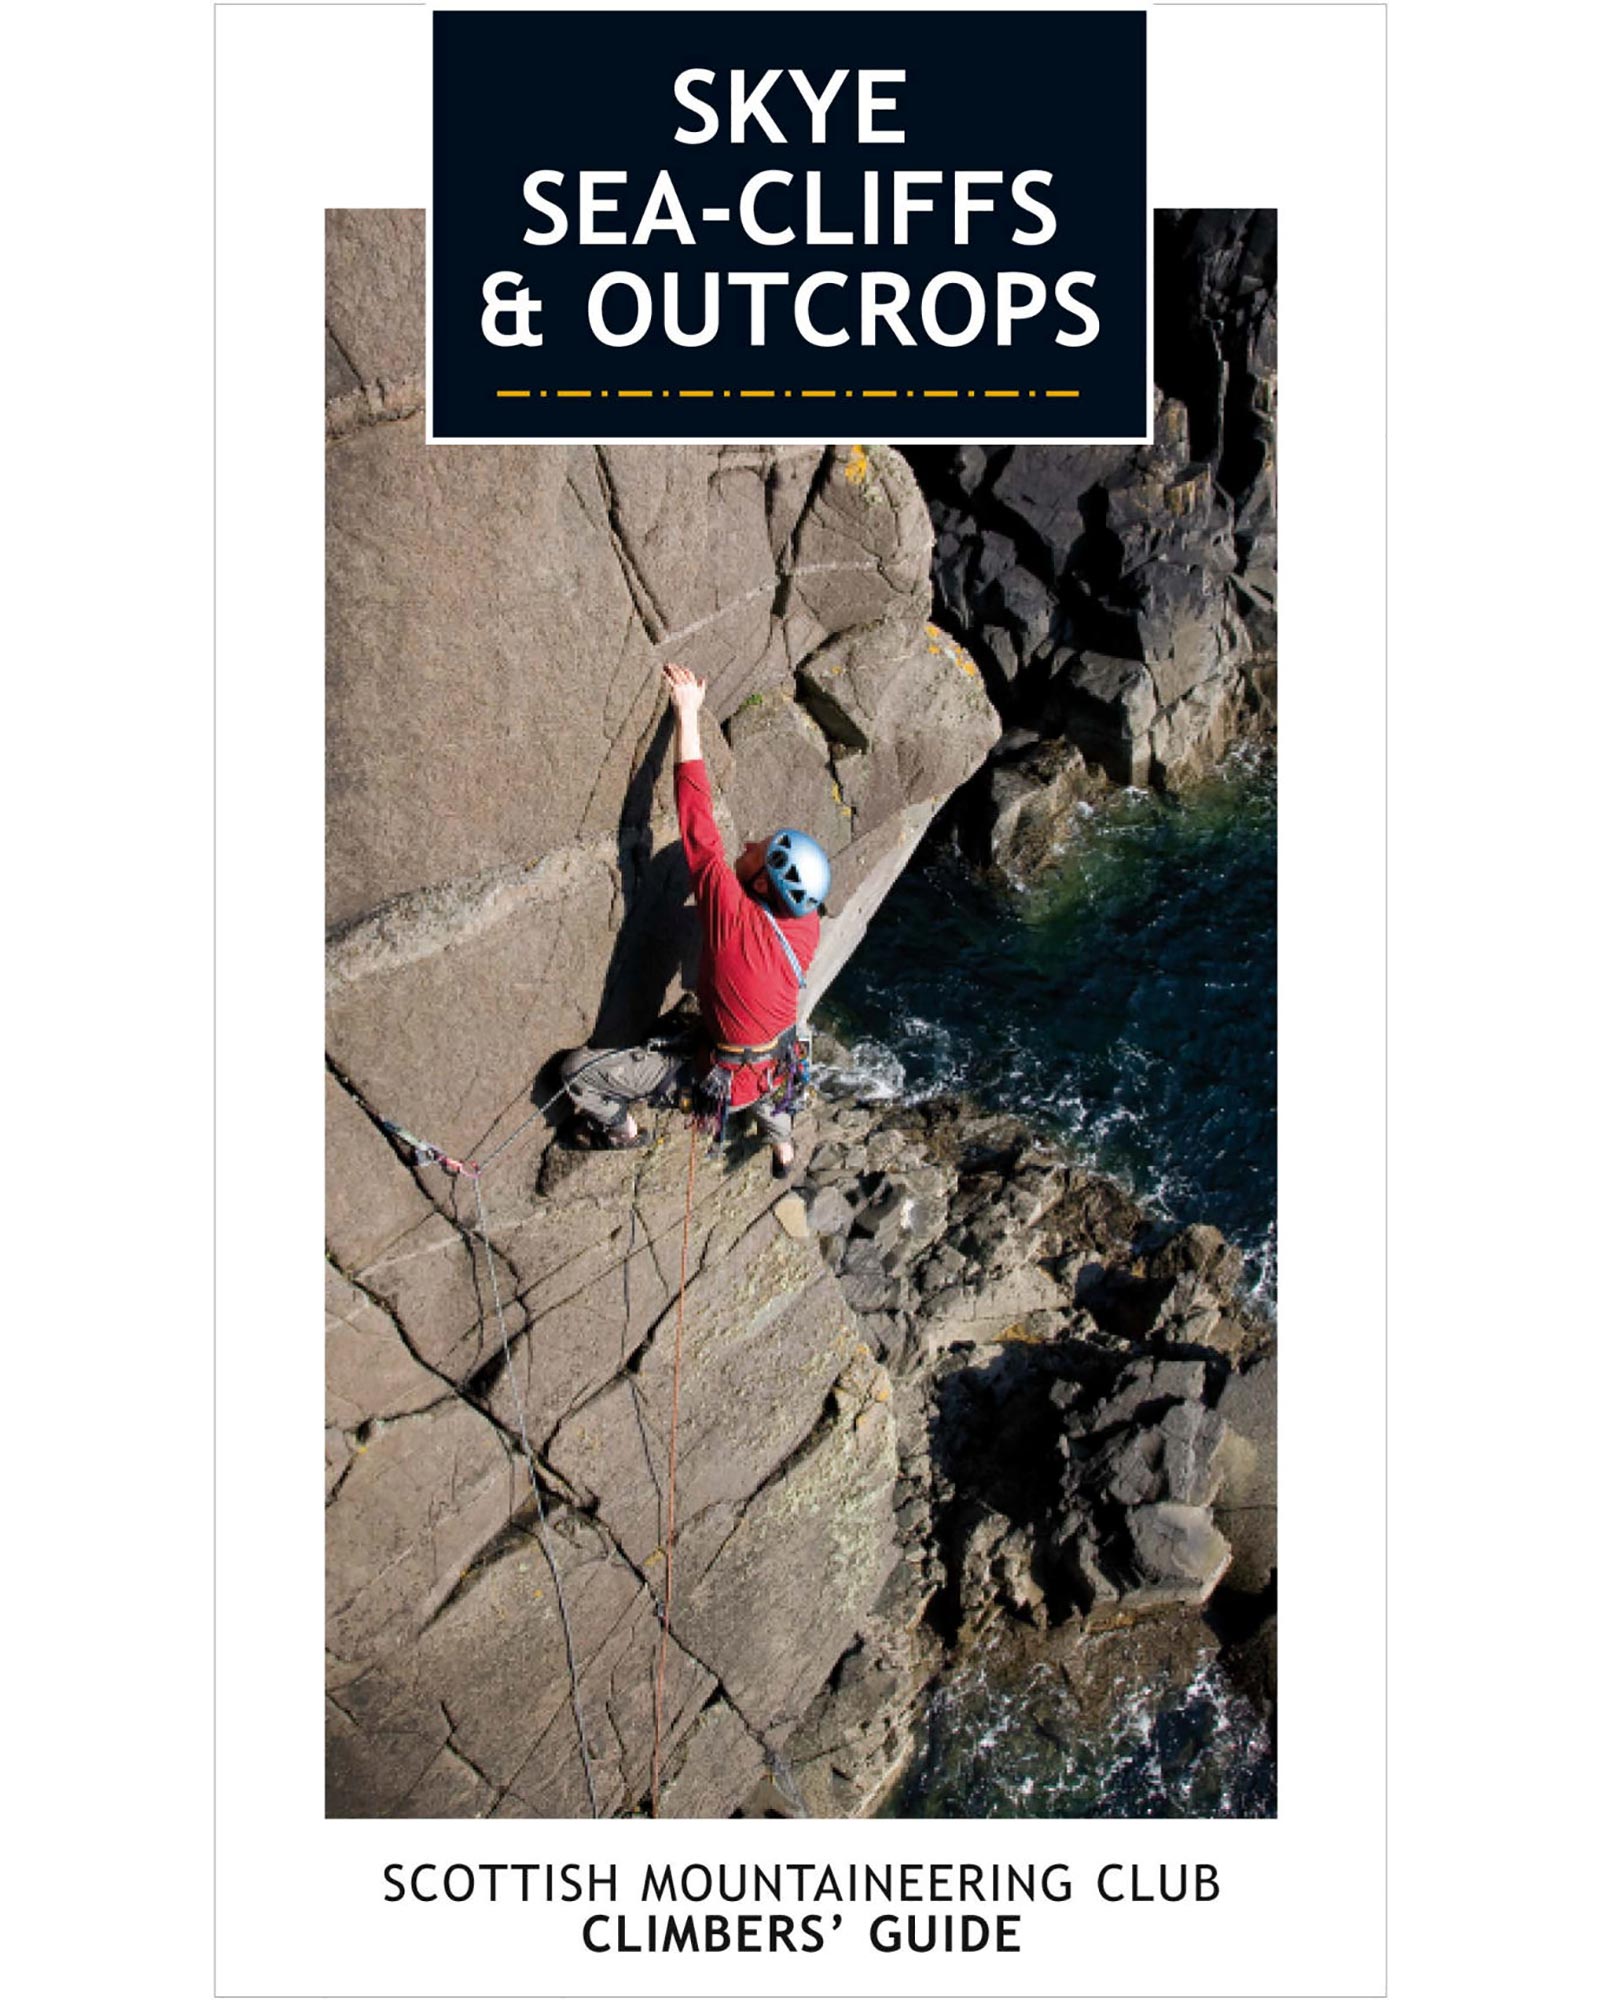 Scottish Mountaineering Club Skye   Sea Cliffs and Outcrops (SMC) Guide Book